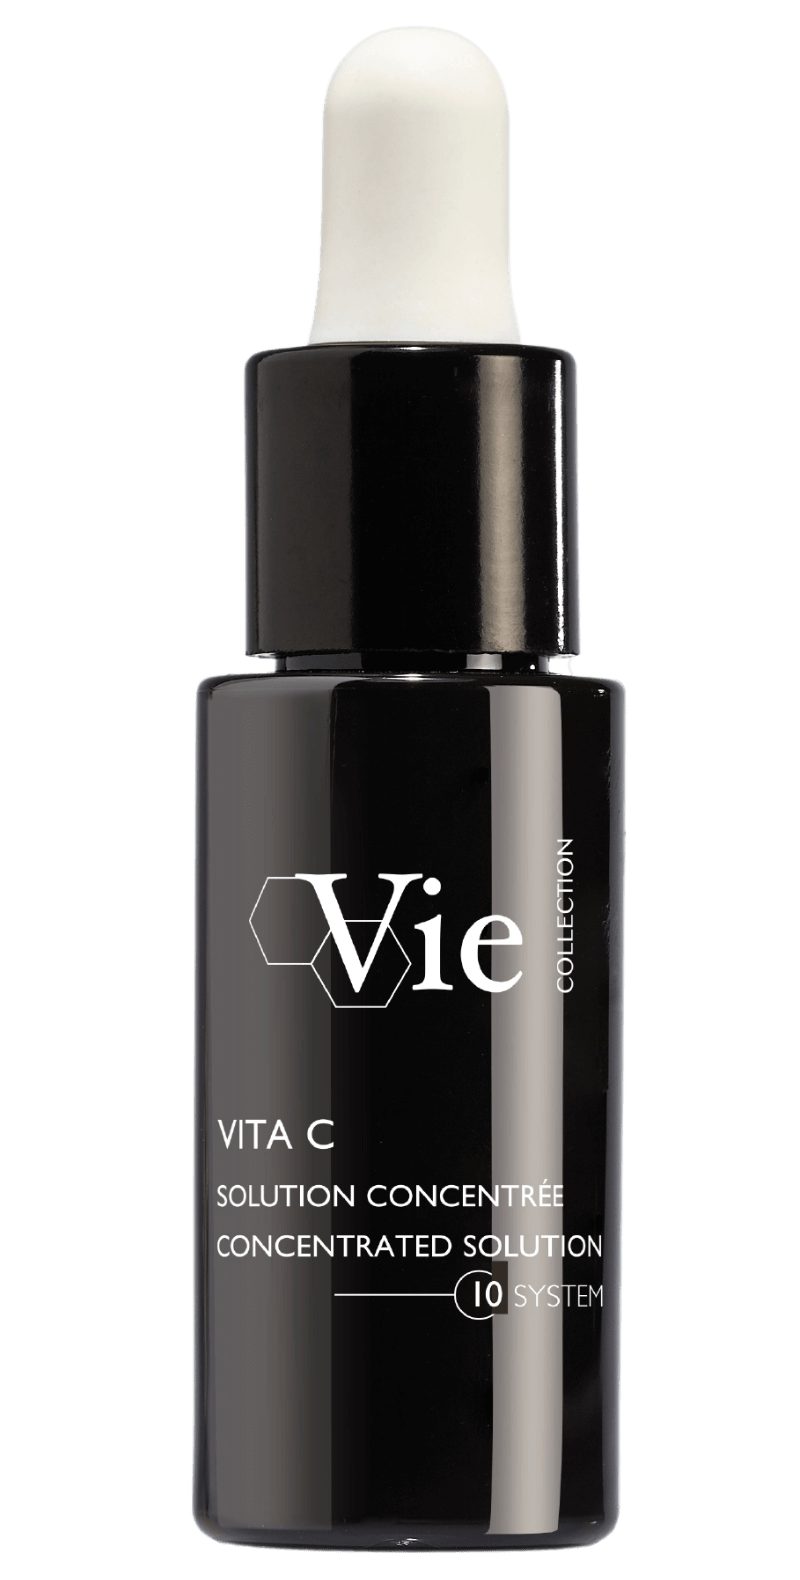 's Vie VITA C Concentrated Solution - Bellini's Skin and Parfumerie 